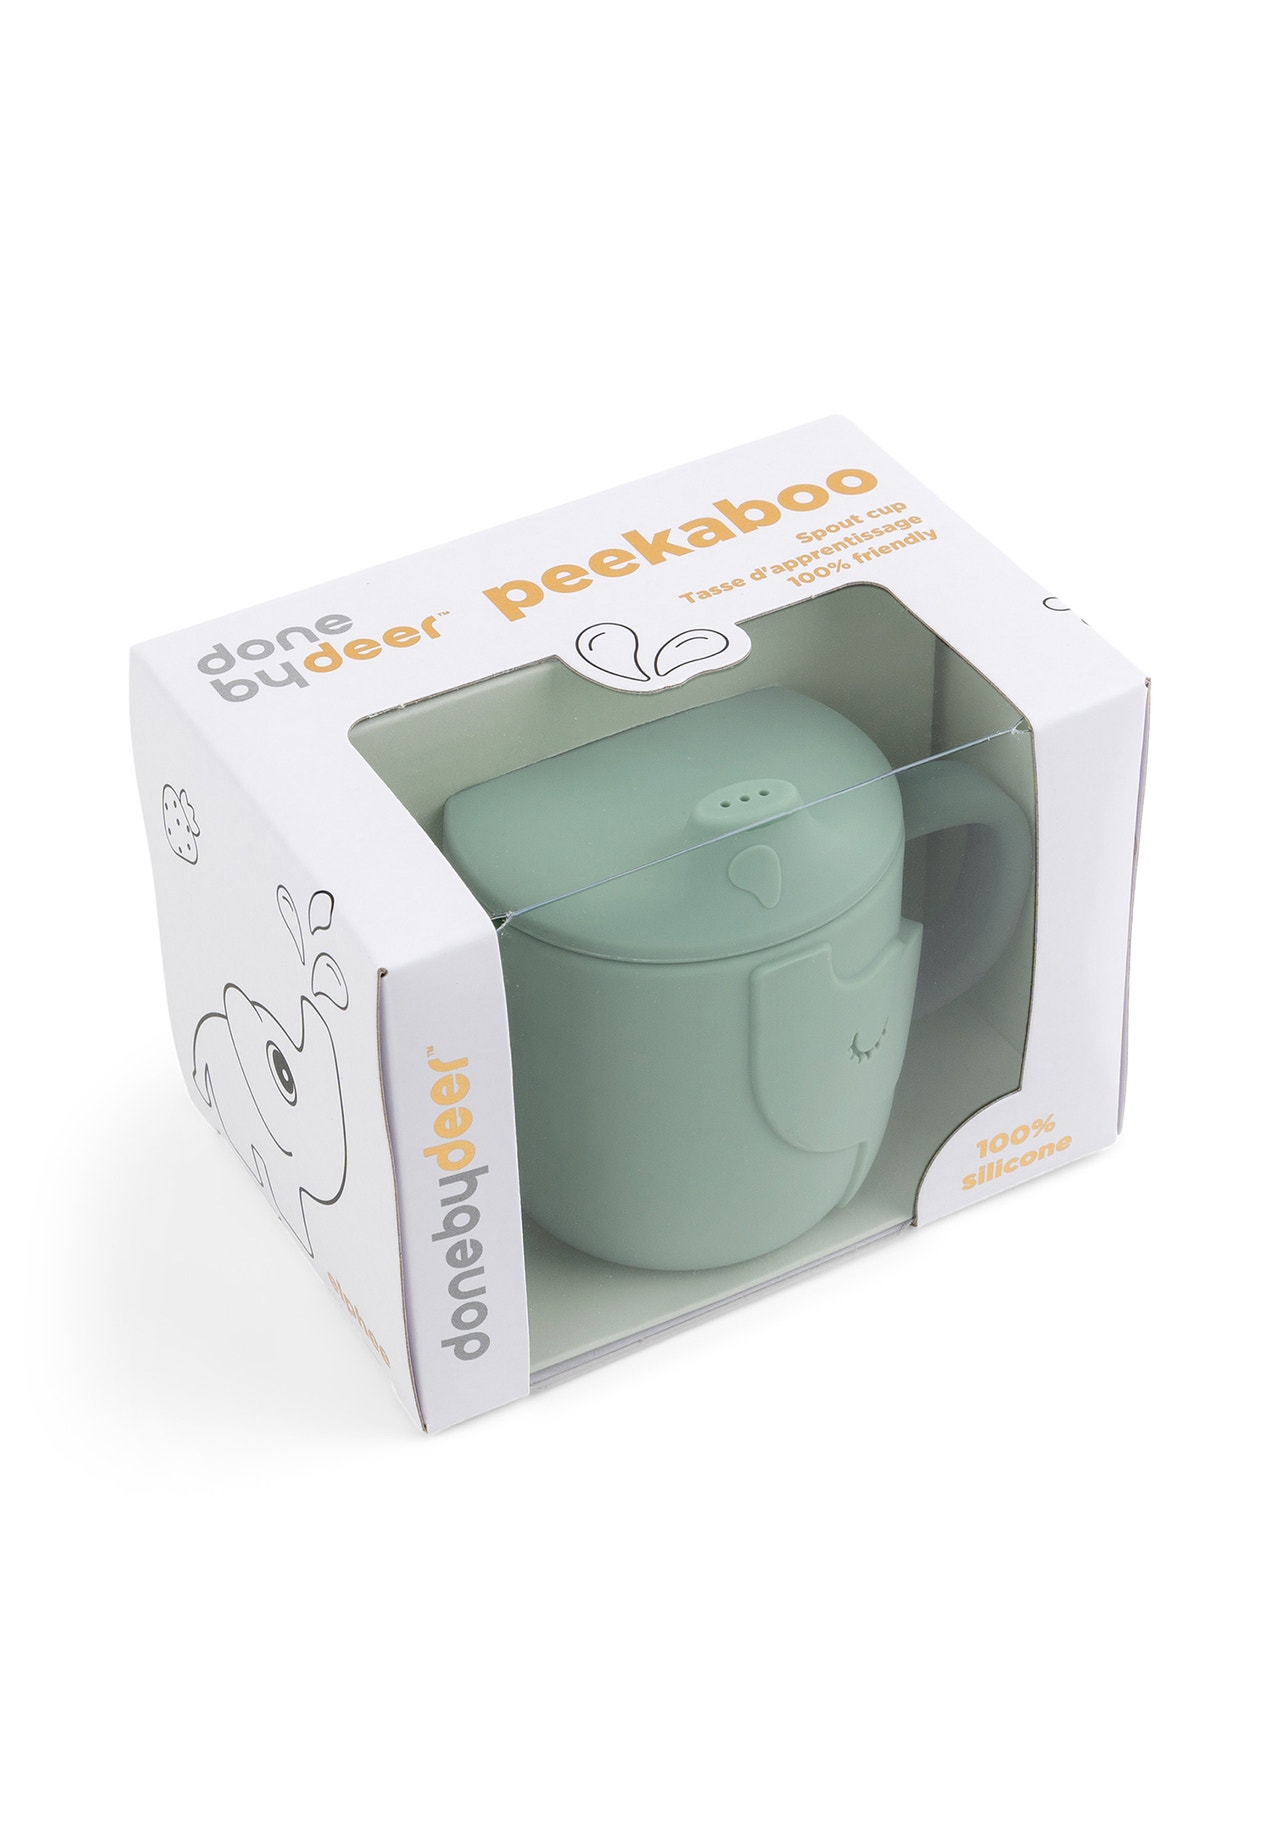 MAMA.LICIOUS Done by deer Peekaboo spout cup -Green - 55555540